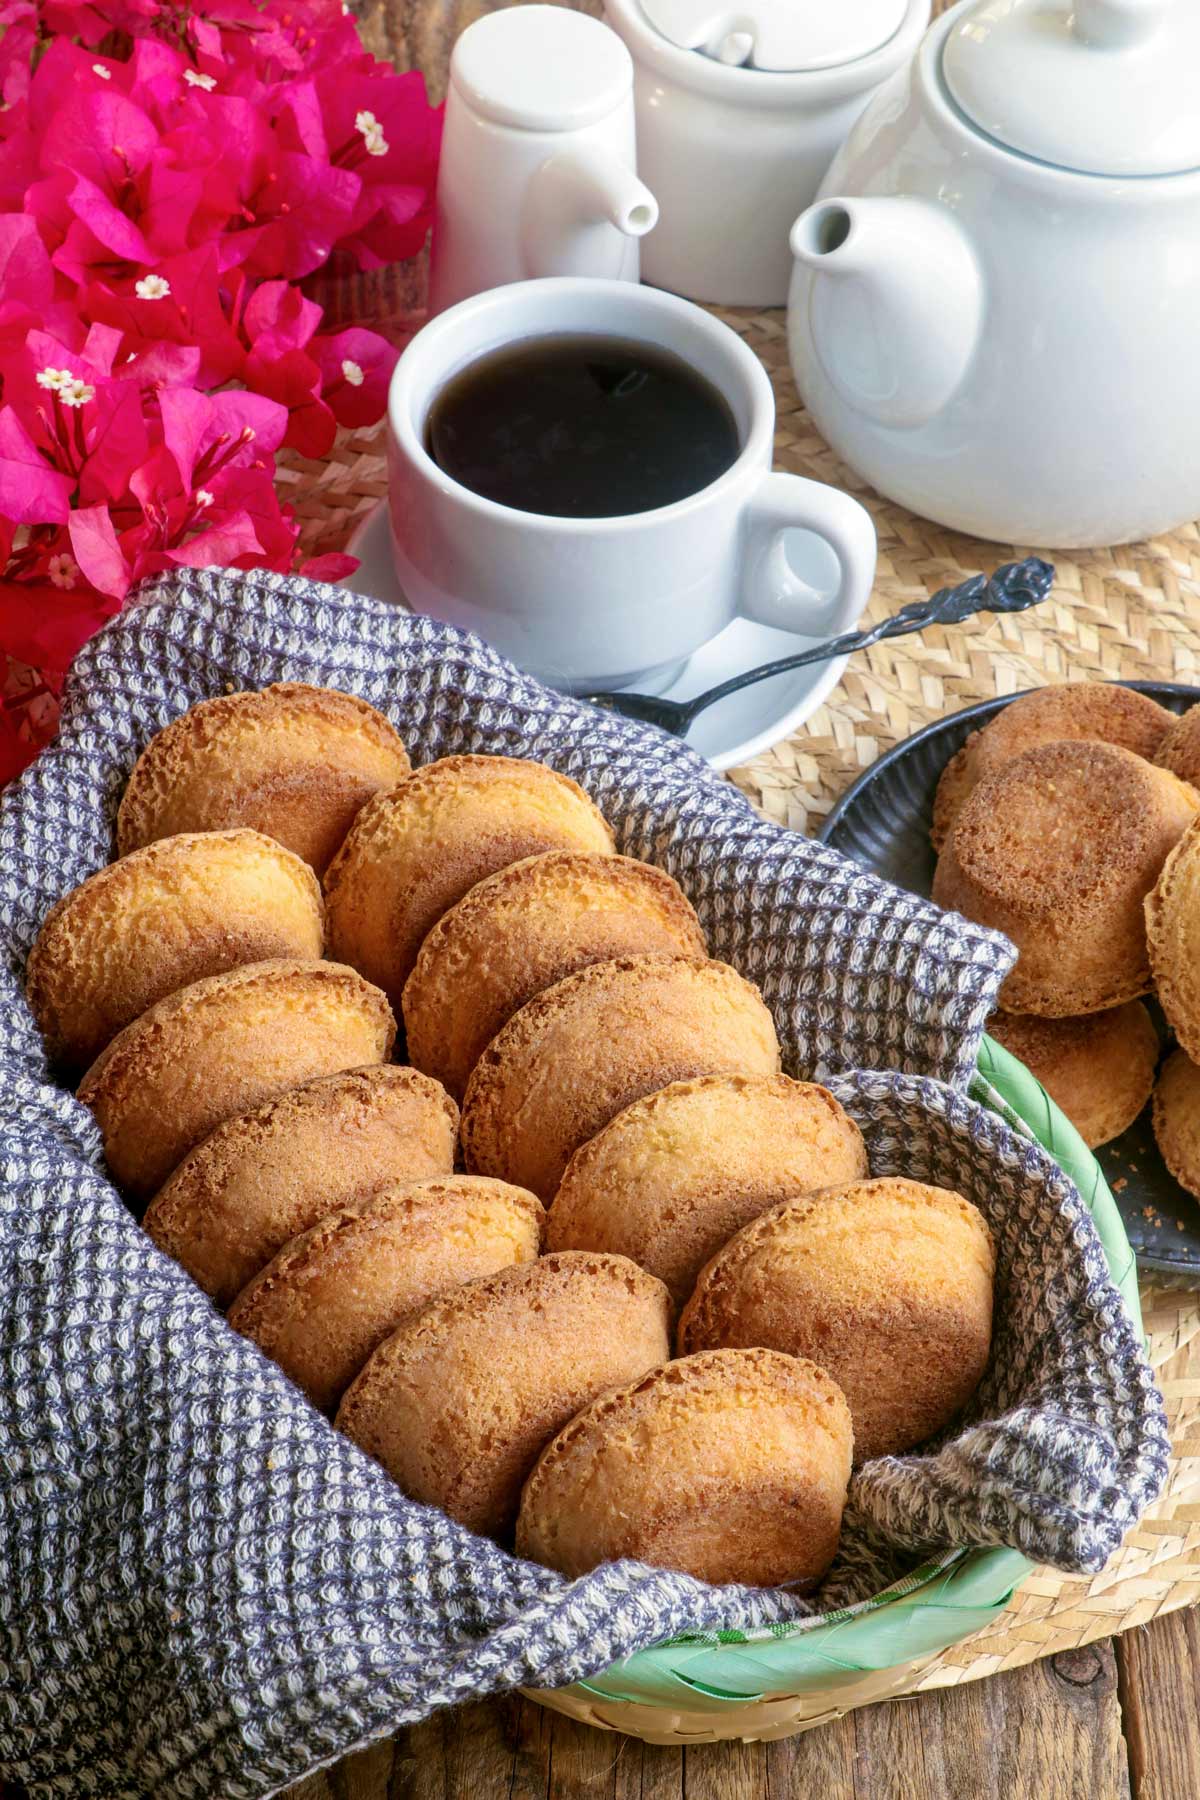 Freshly baked Mamon Tostado in a bread basket served with hot coffee.